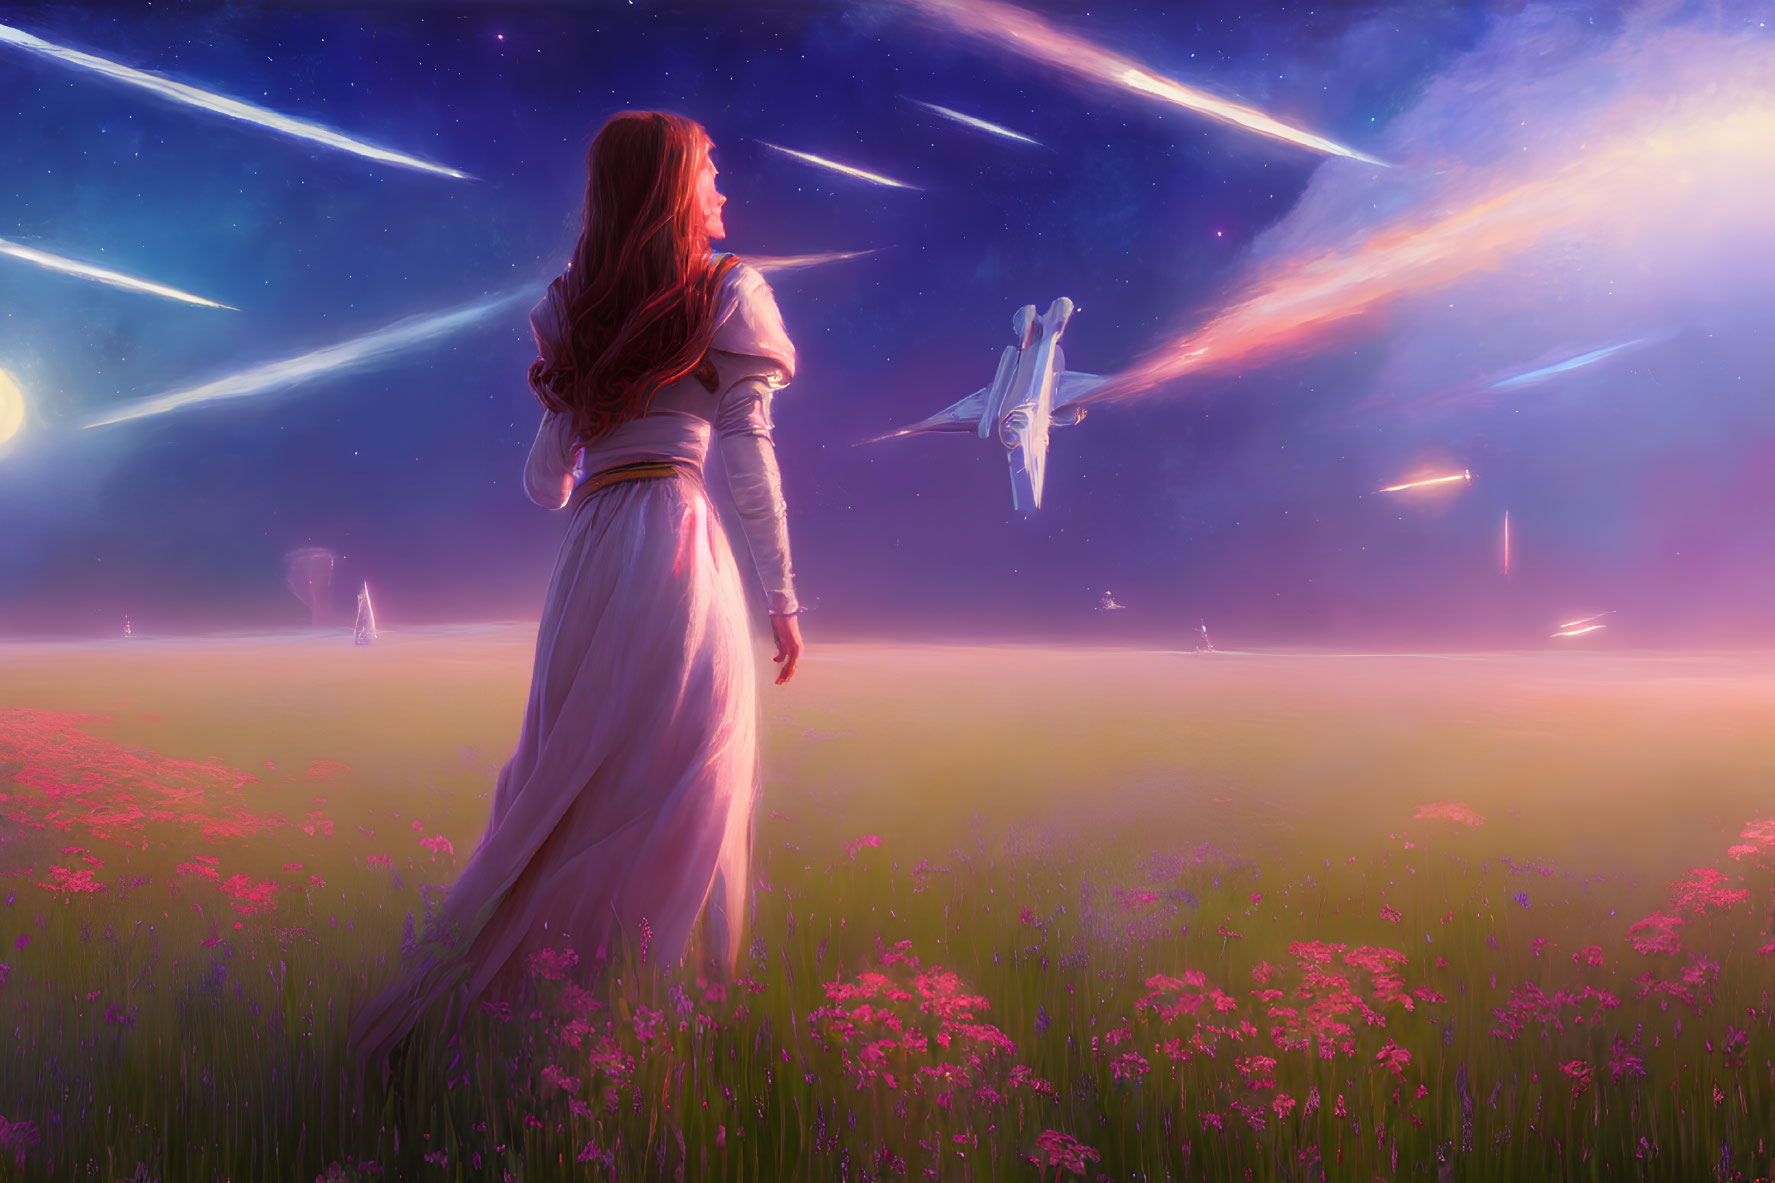 Woman in White Dress Observes Starship in Field of Pink Flowers